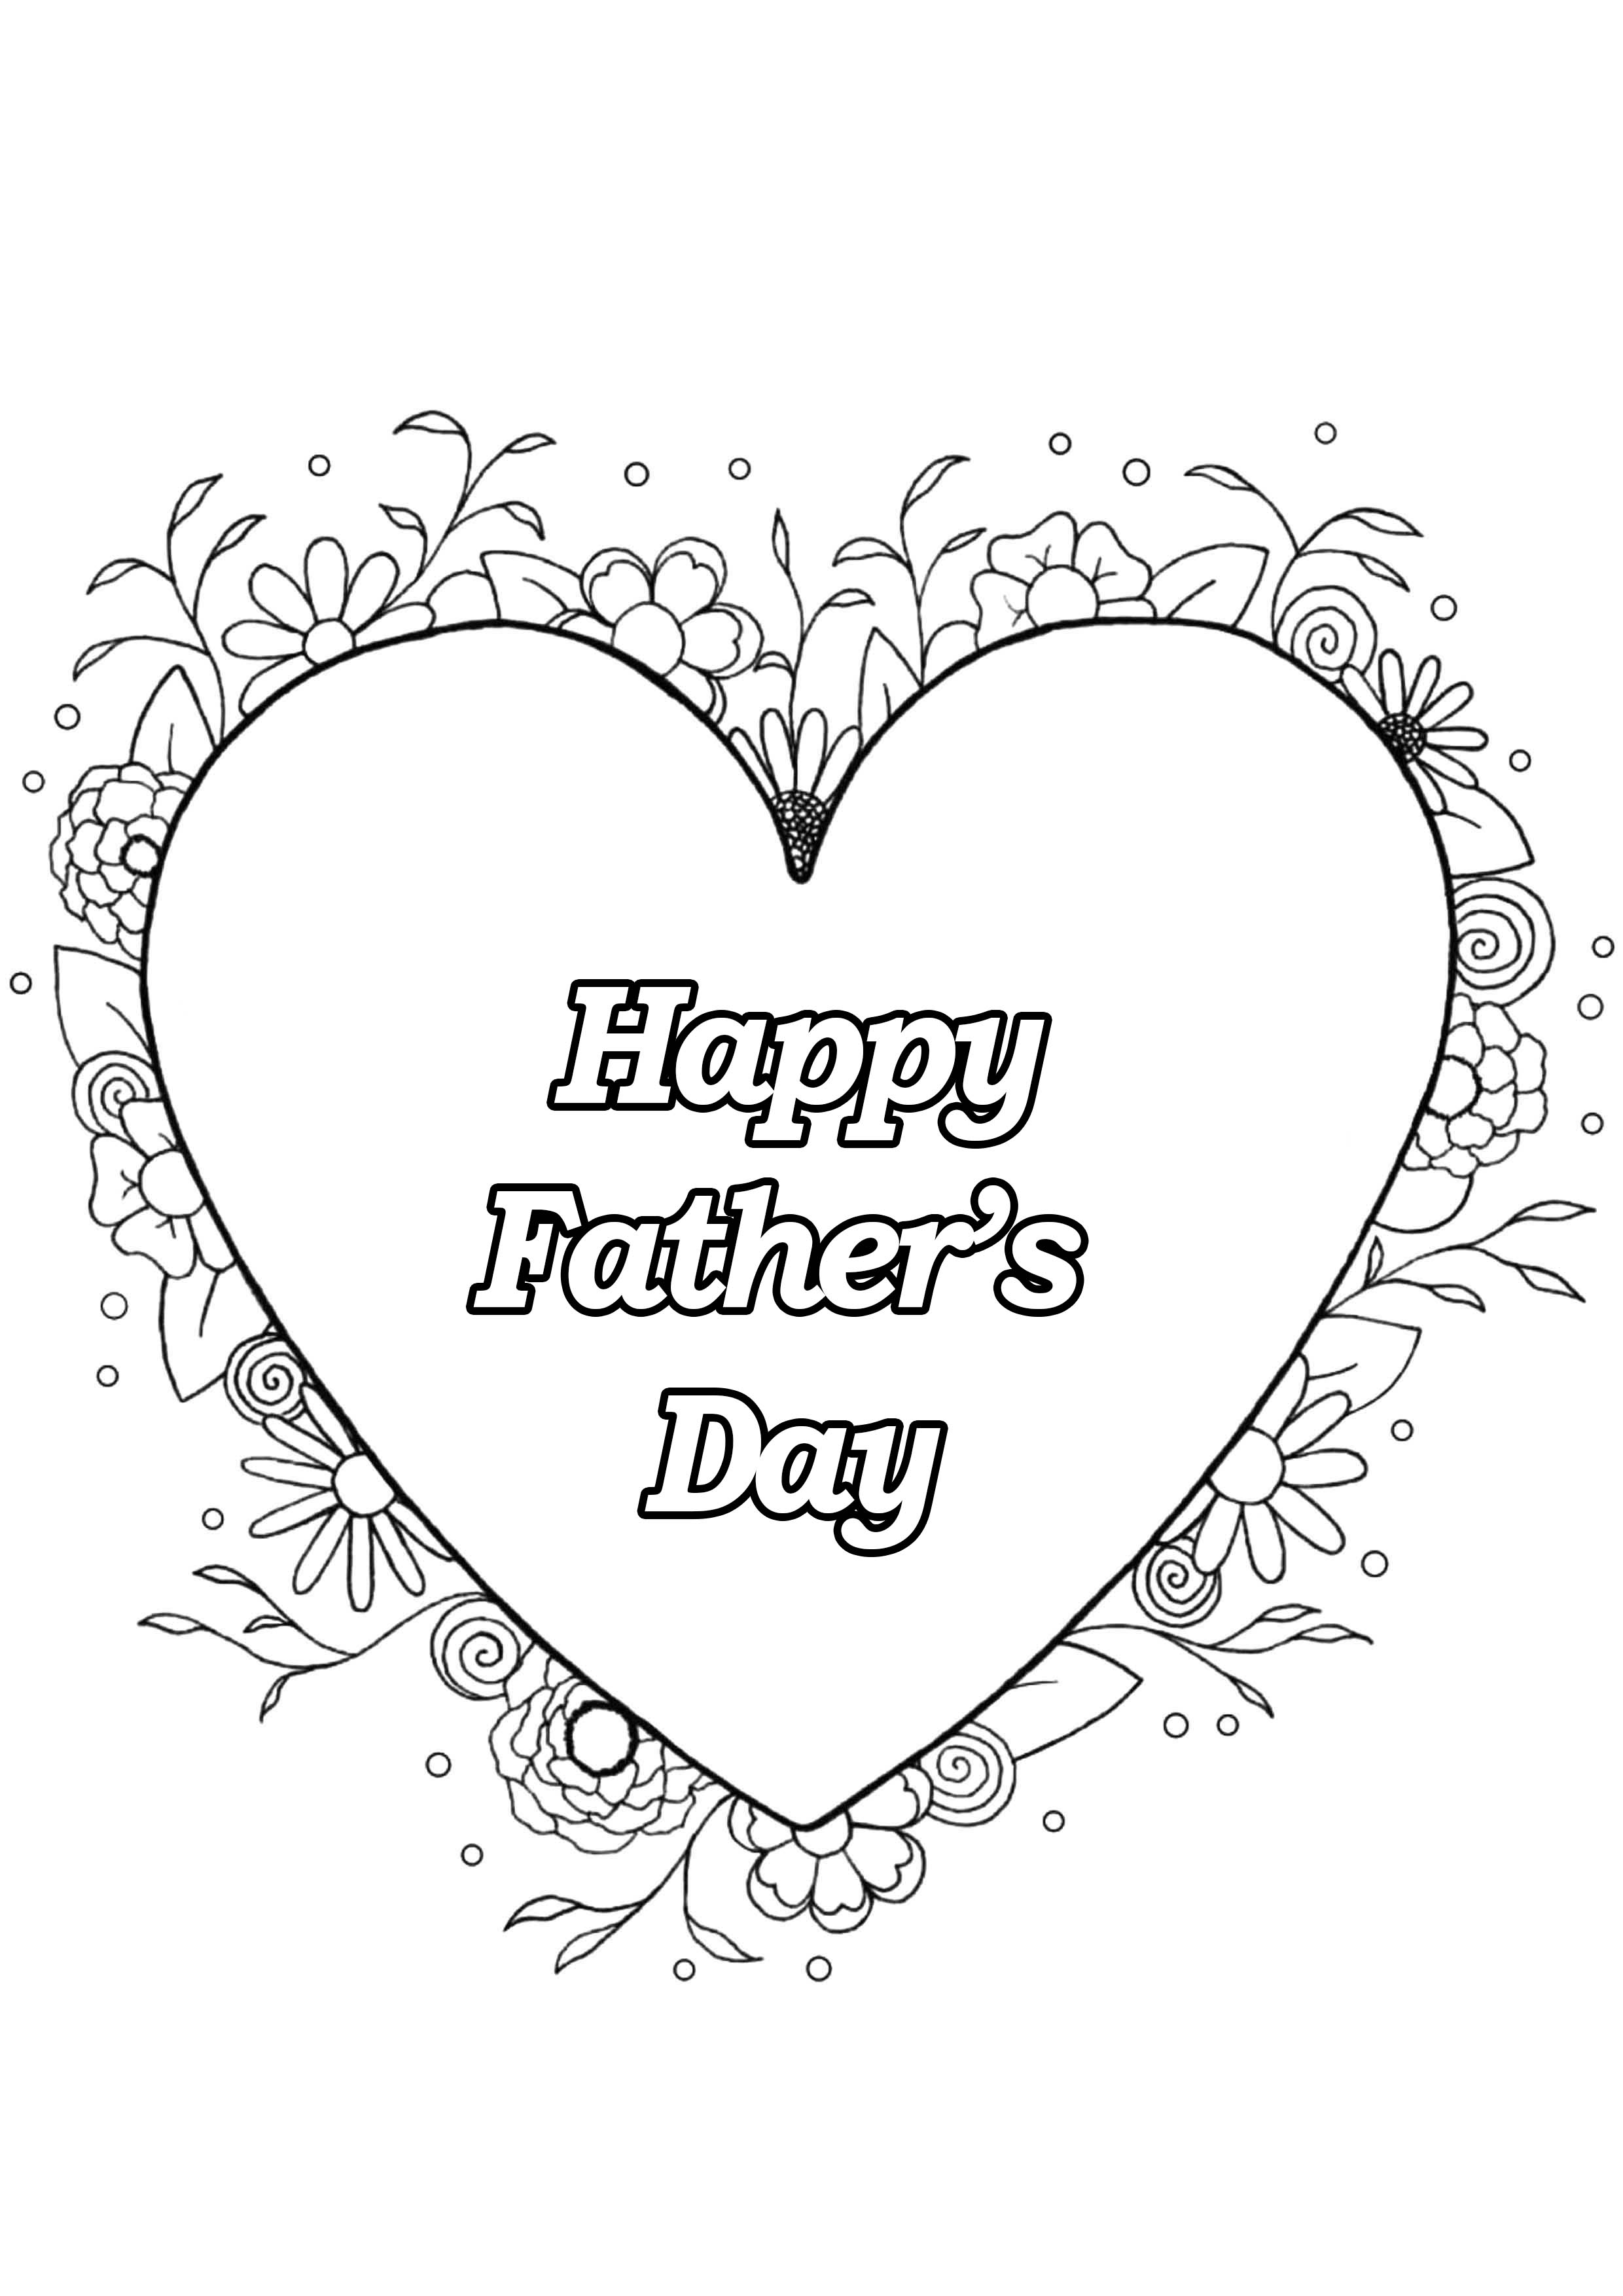 happy-fathers-day-papa-coloring-page-coloring-pages